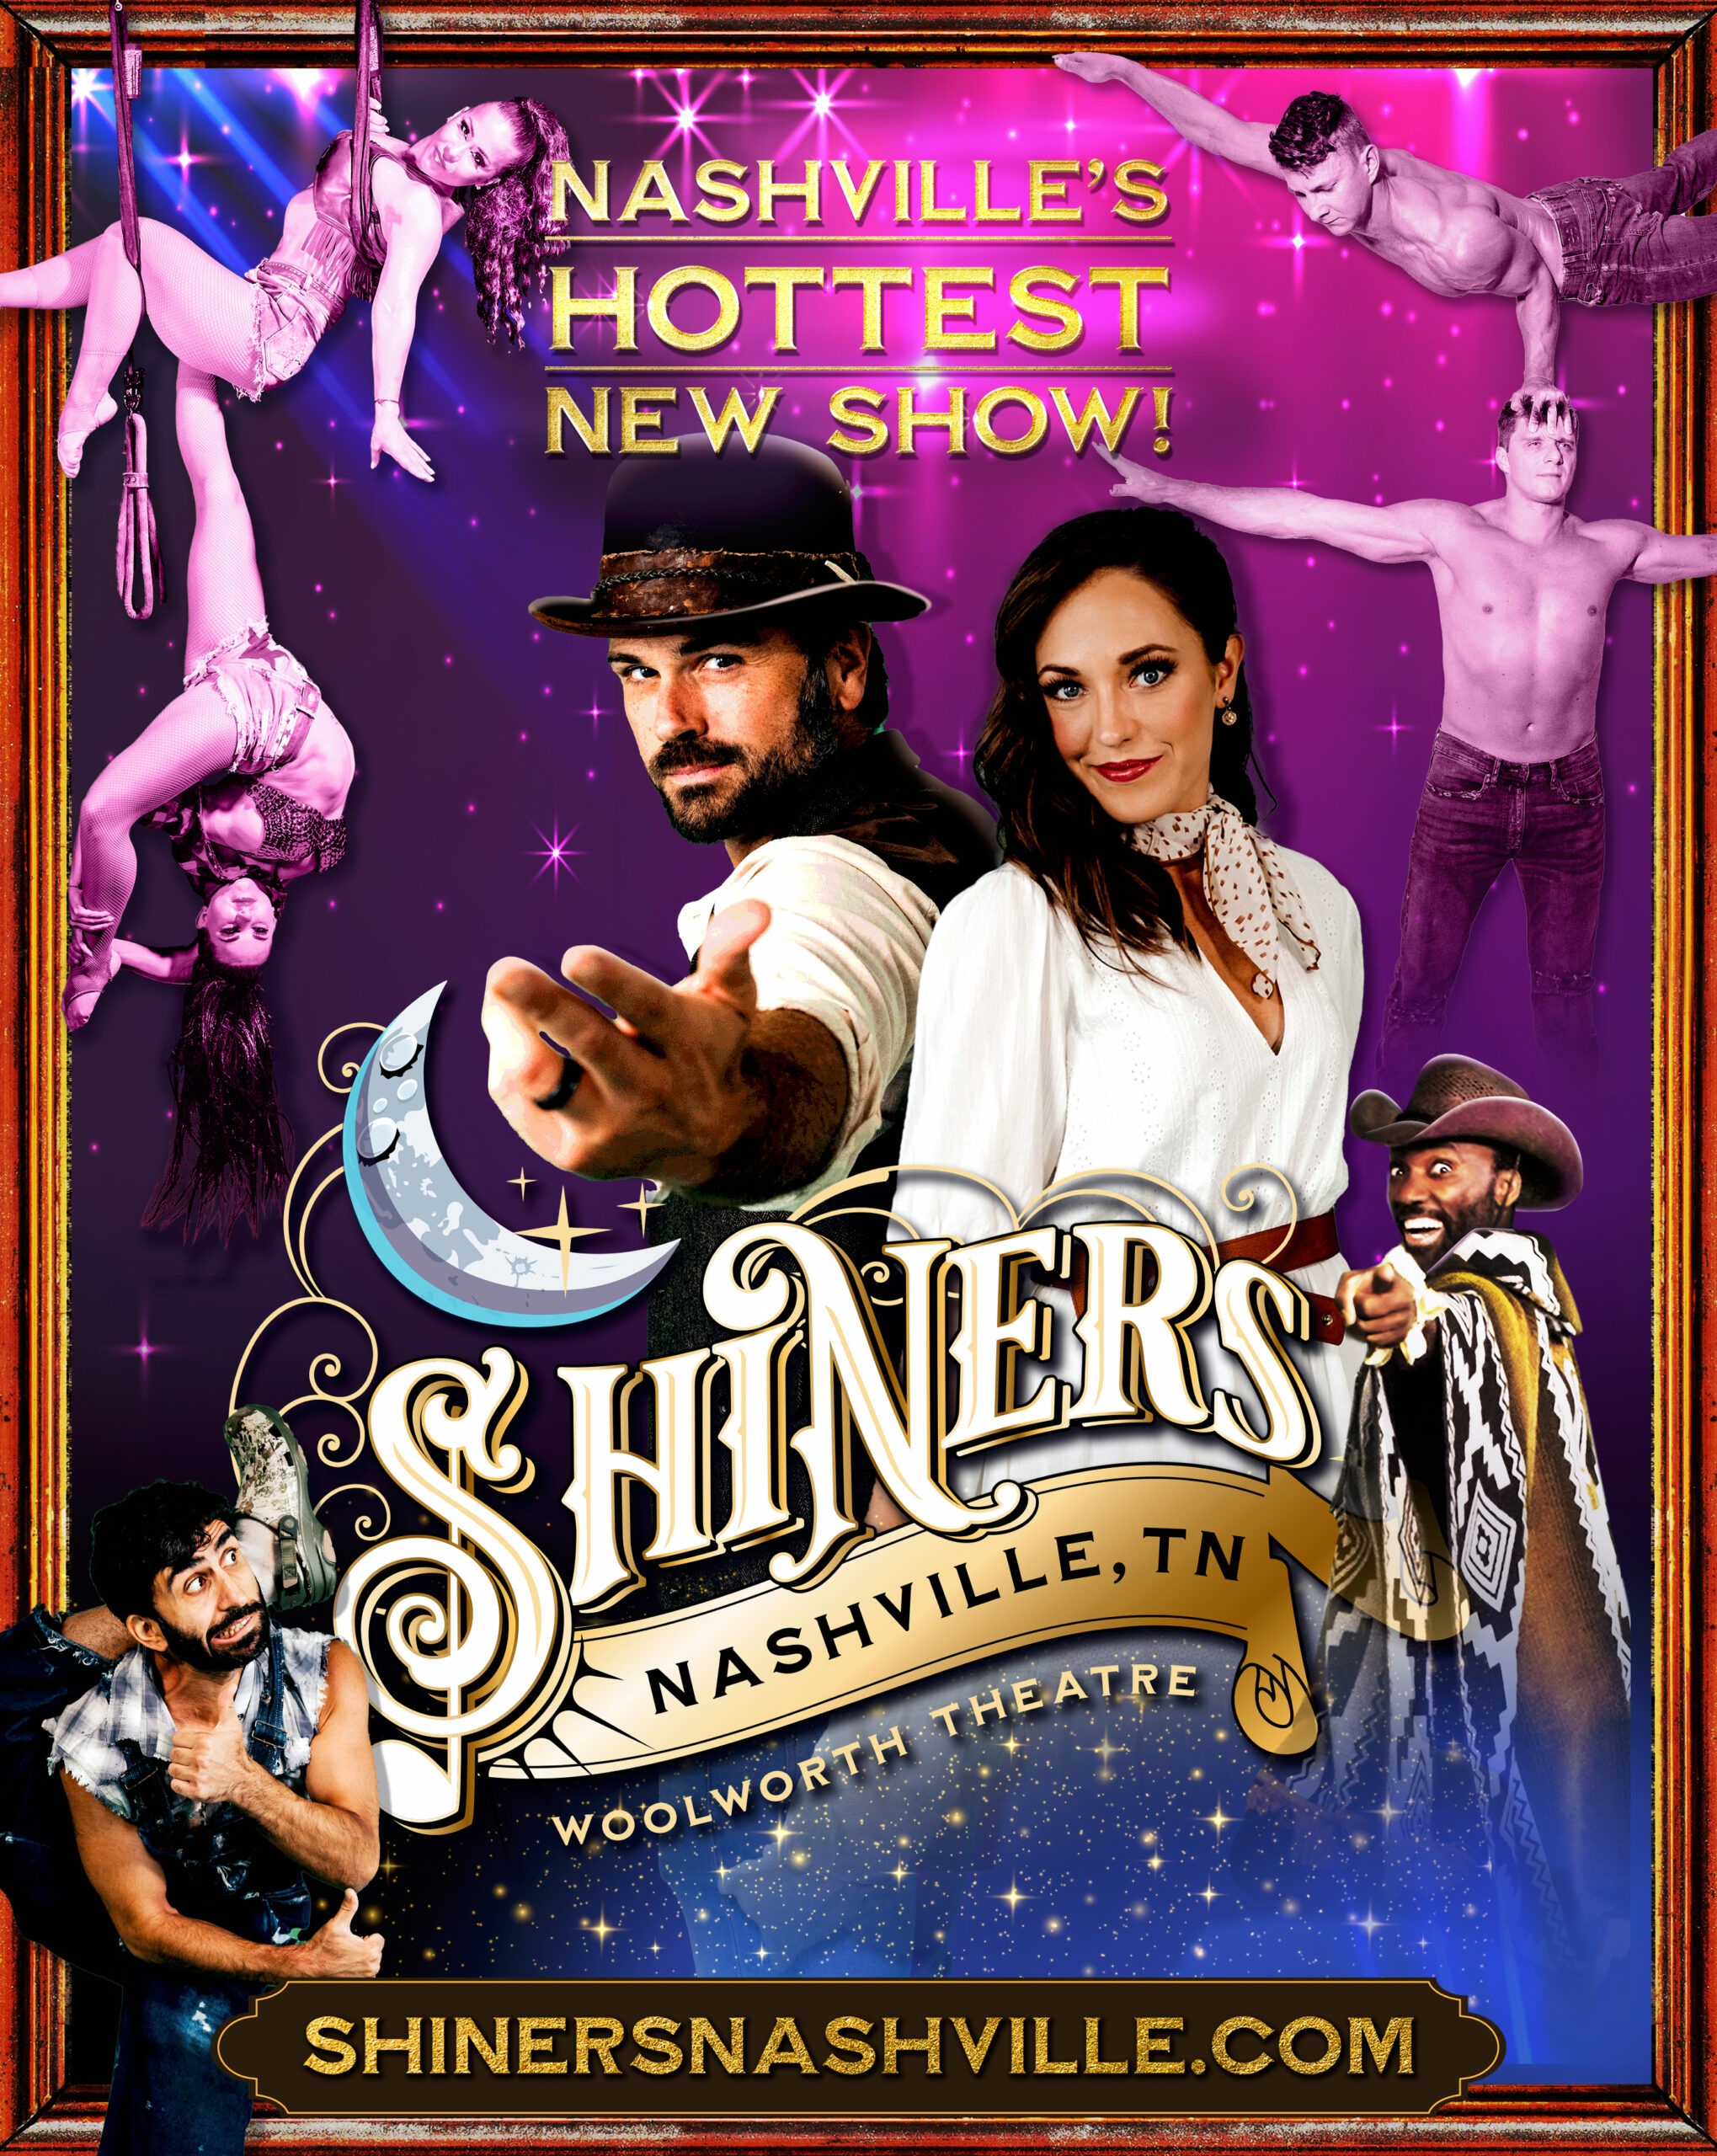 Shiners Nashville: First of its Kind Show